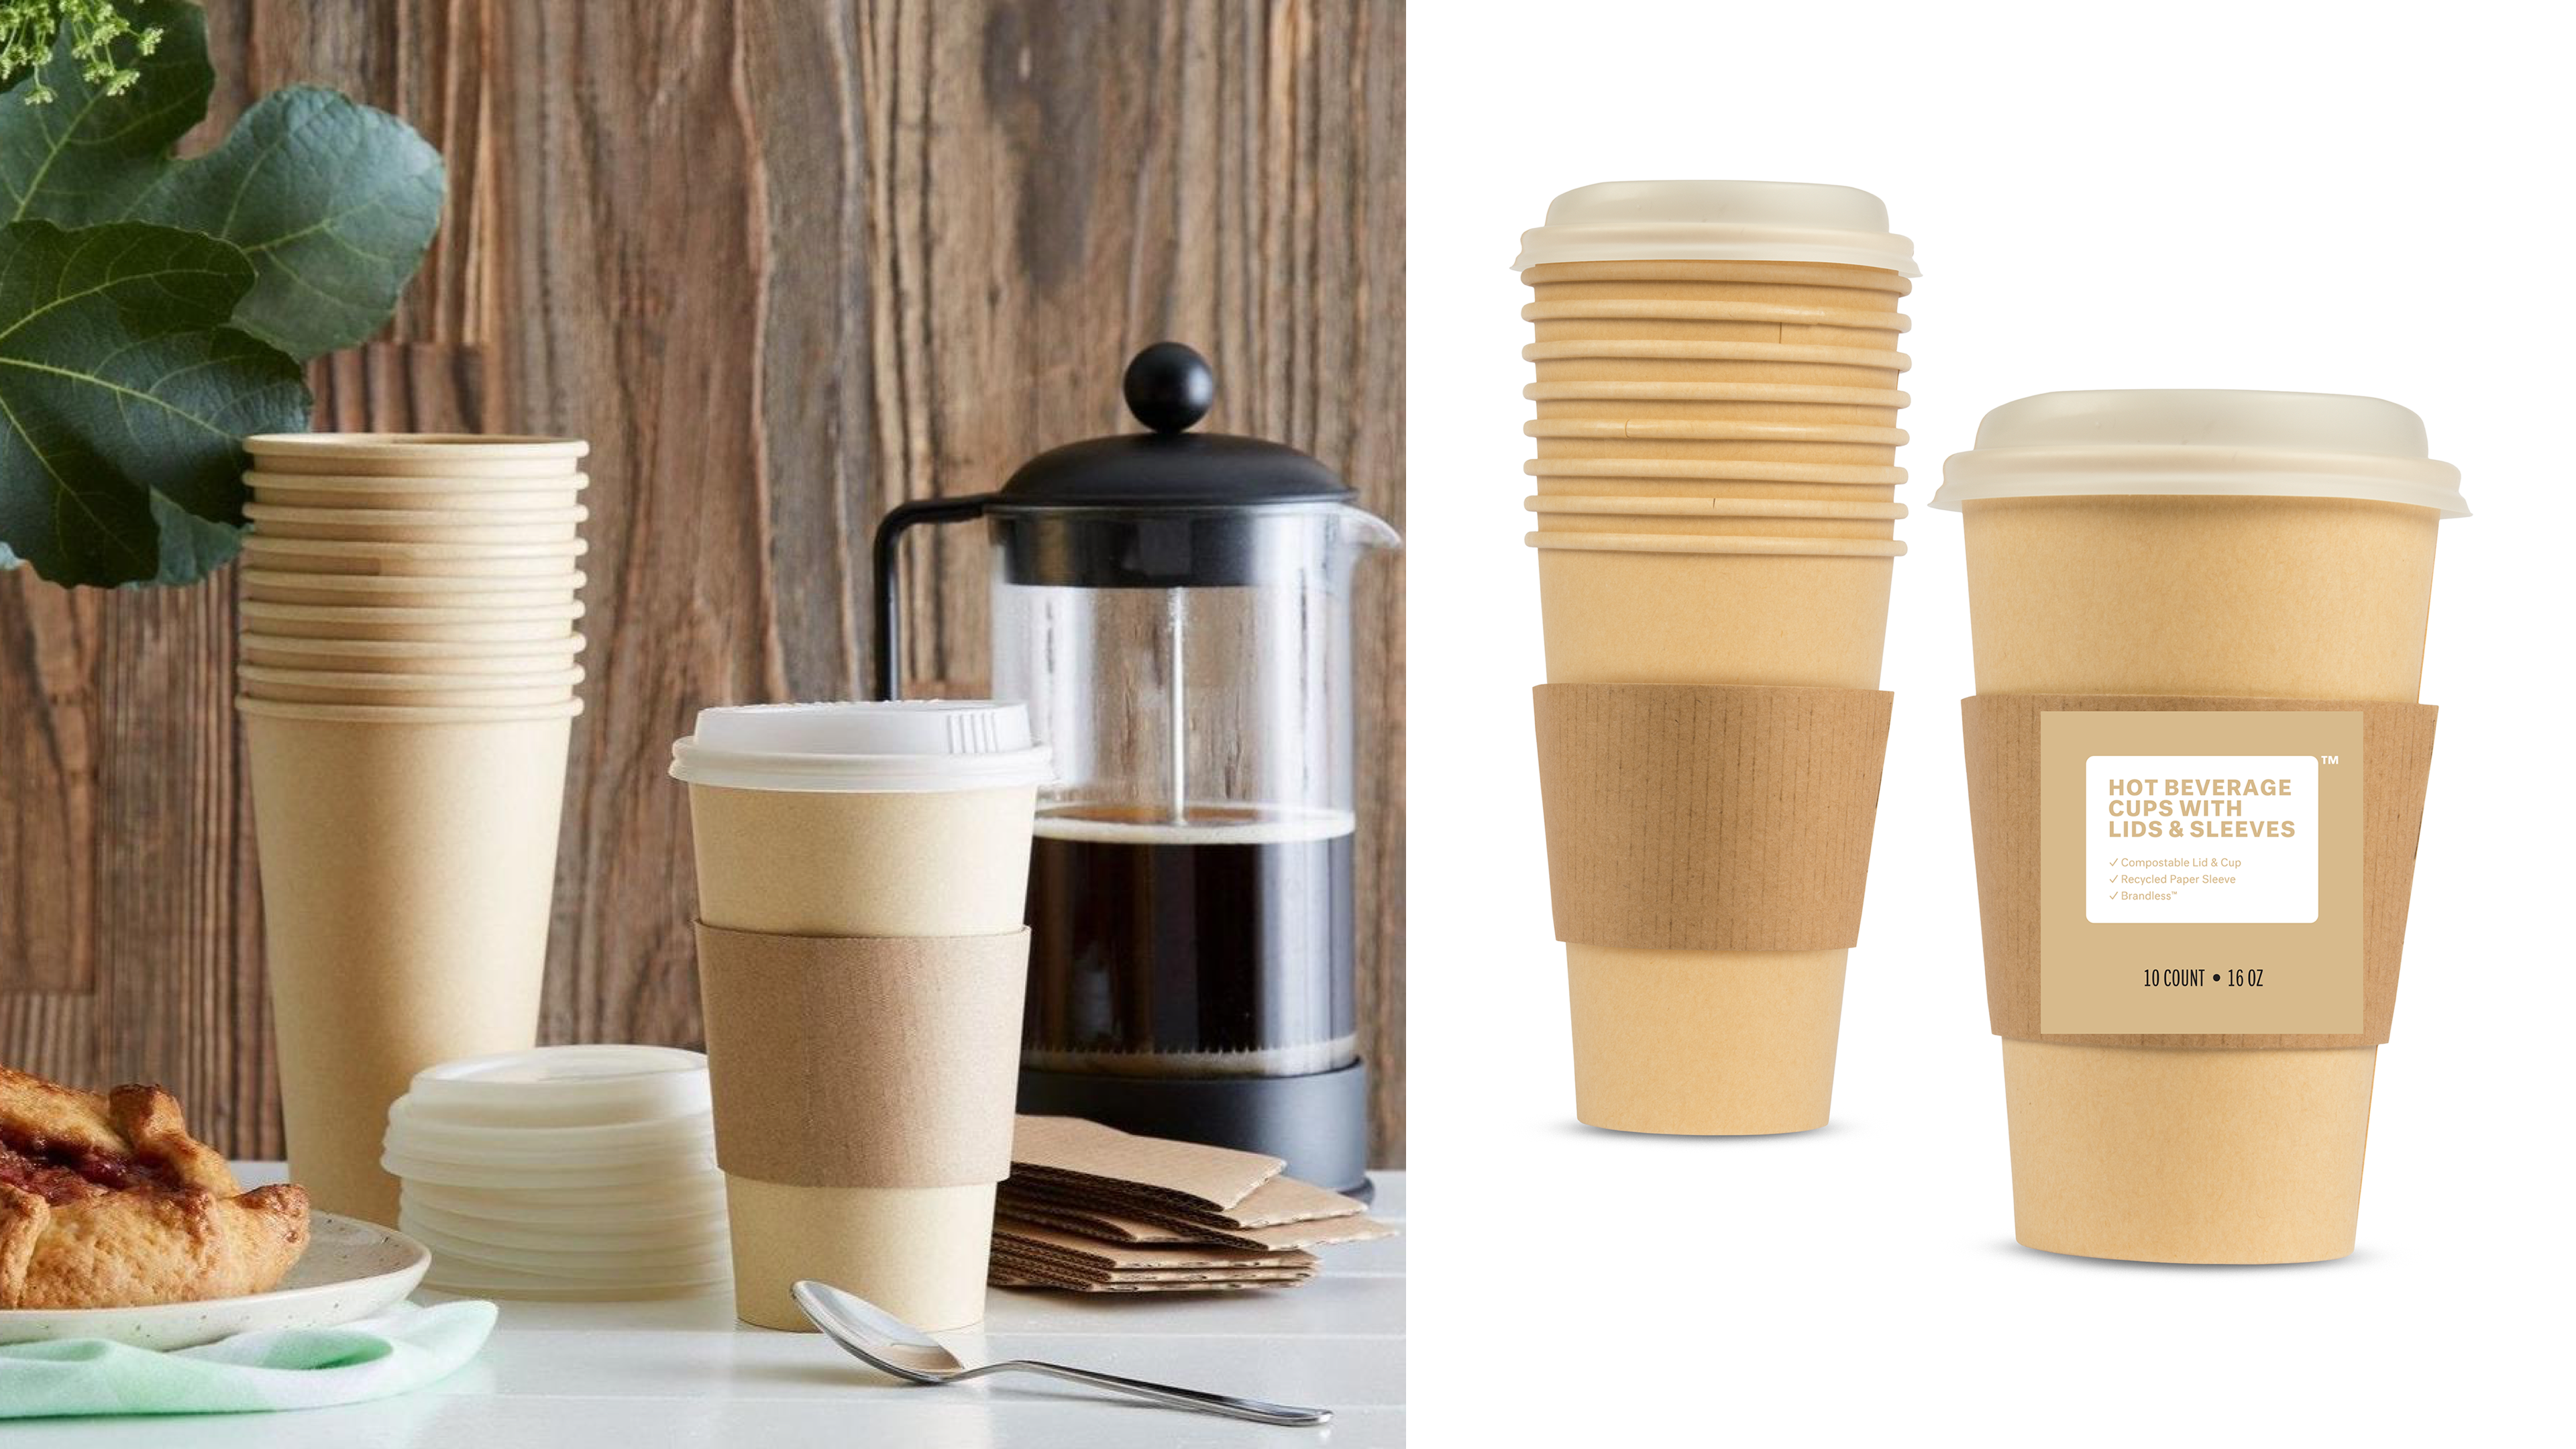 compostable single-use coffee cups with recycled cardboard sleeves